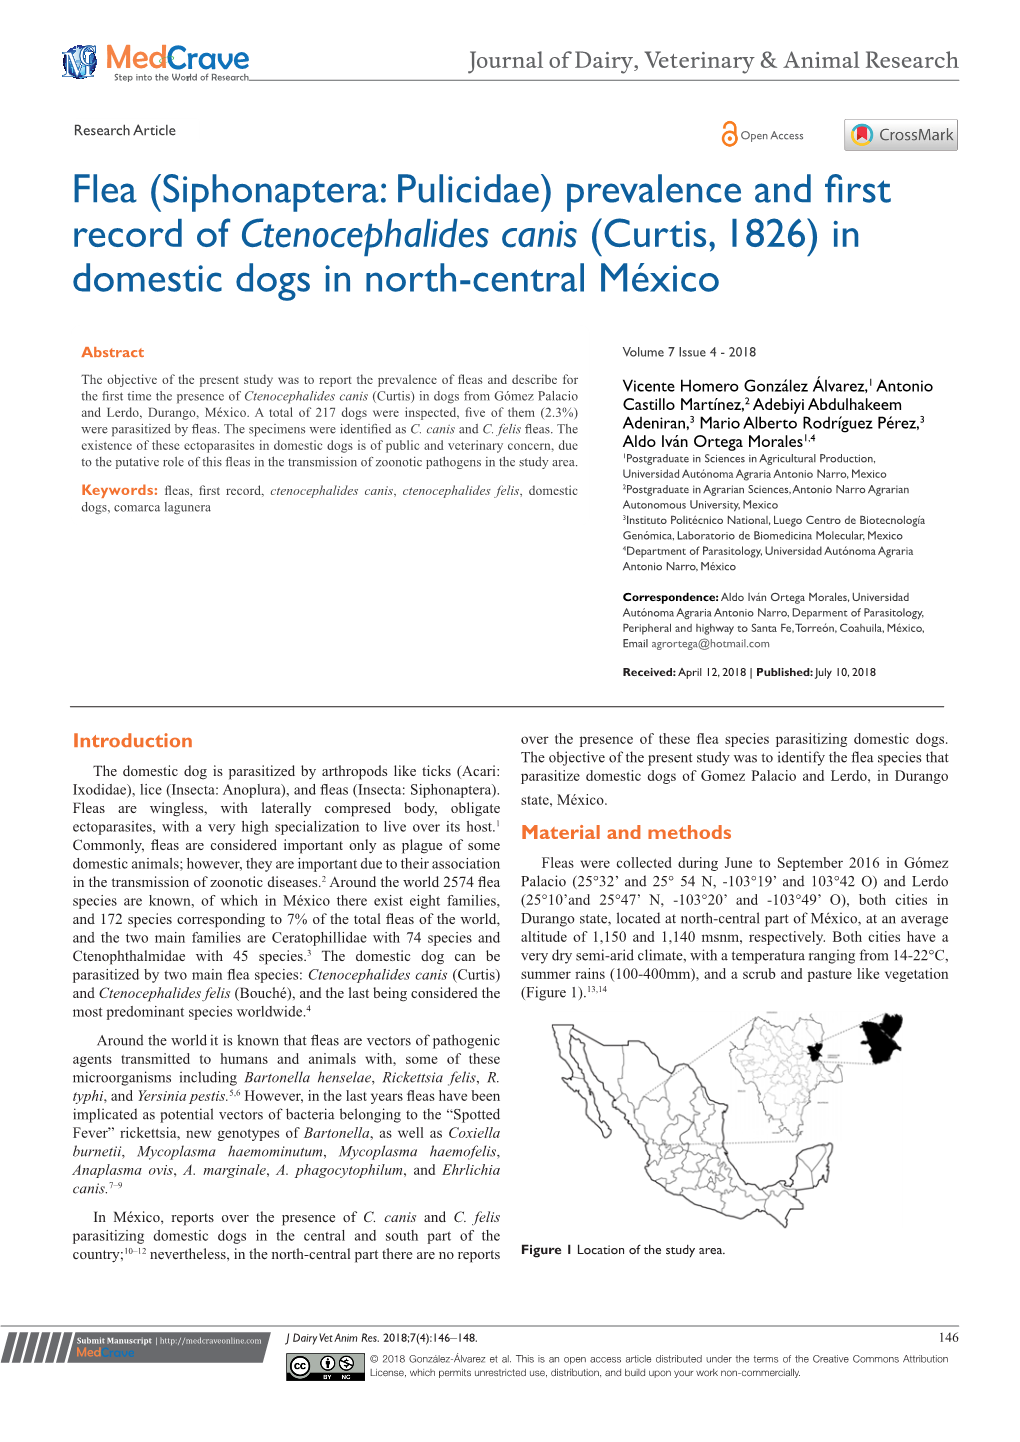 Flea (Siphonaptera: Pulicidae) Prevalence and First Record of Ctenocephalides Canis (Curtis, 1826) in Domestic Dogs in North-Central México